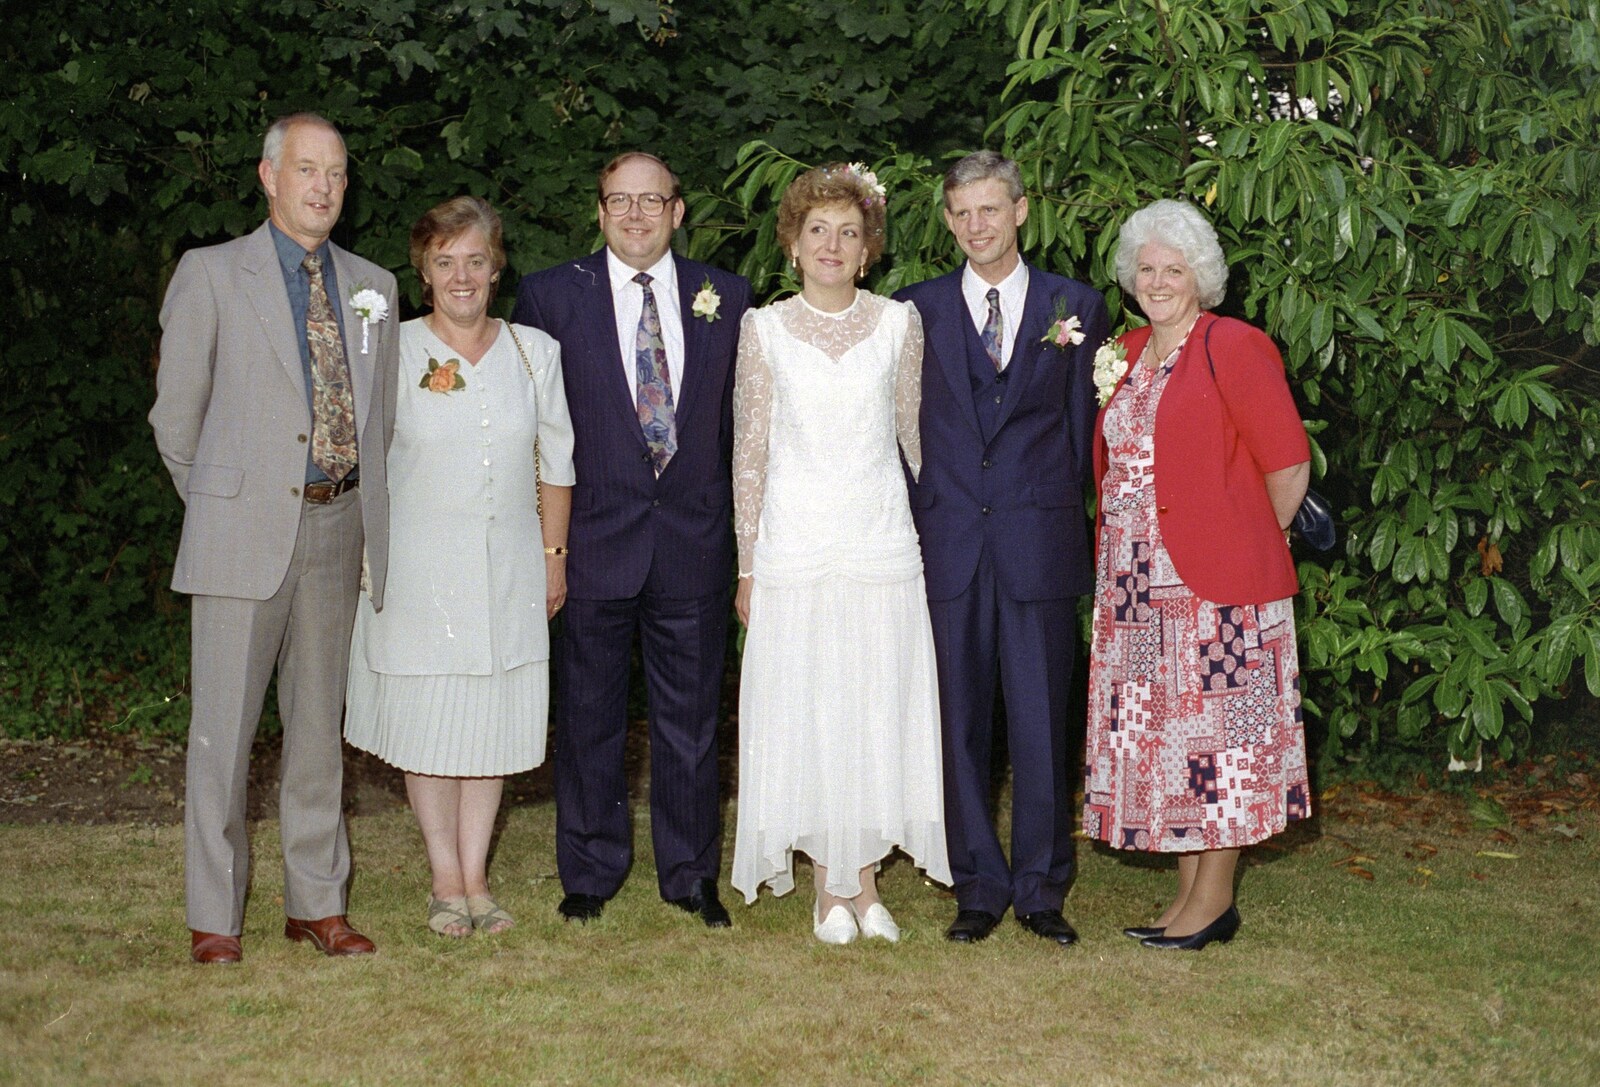 David and Linda join the group from Steve-O's Wedding, Thorpe St. Andrew, Norwich, Norfolk - 3rd July